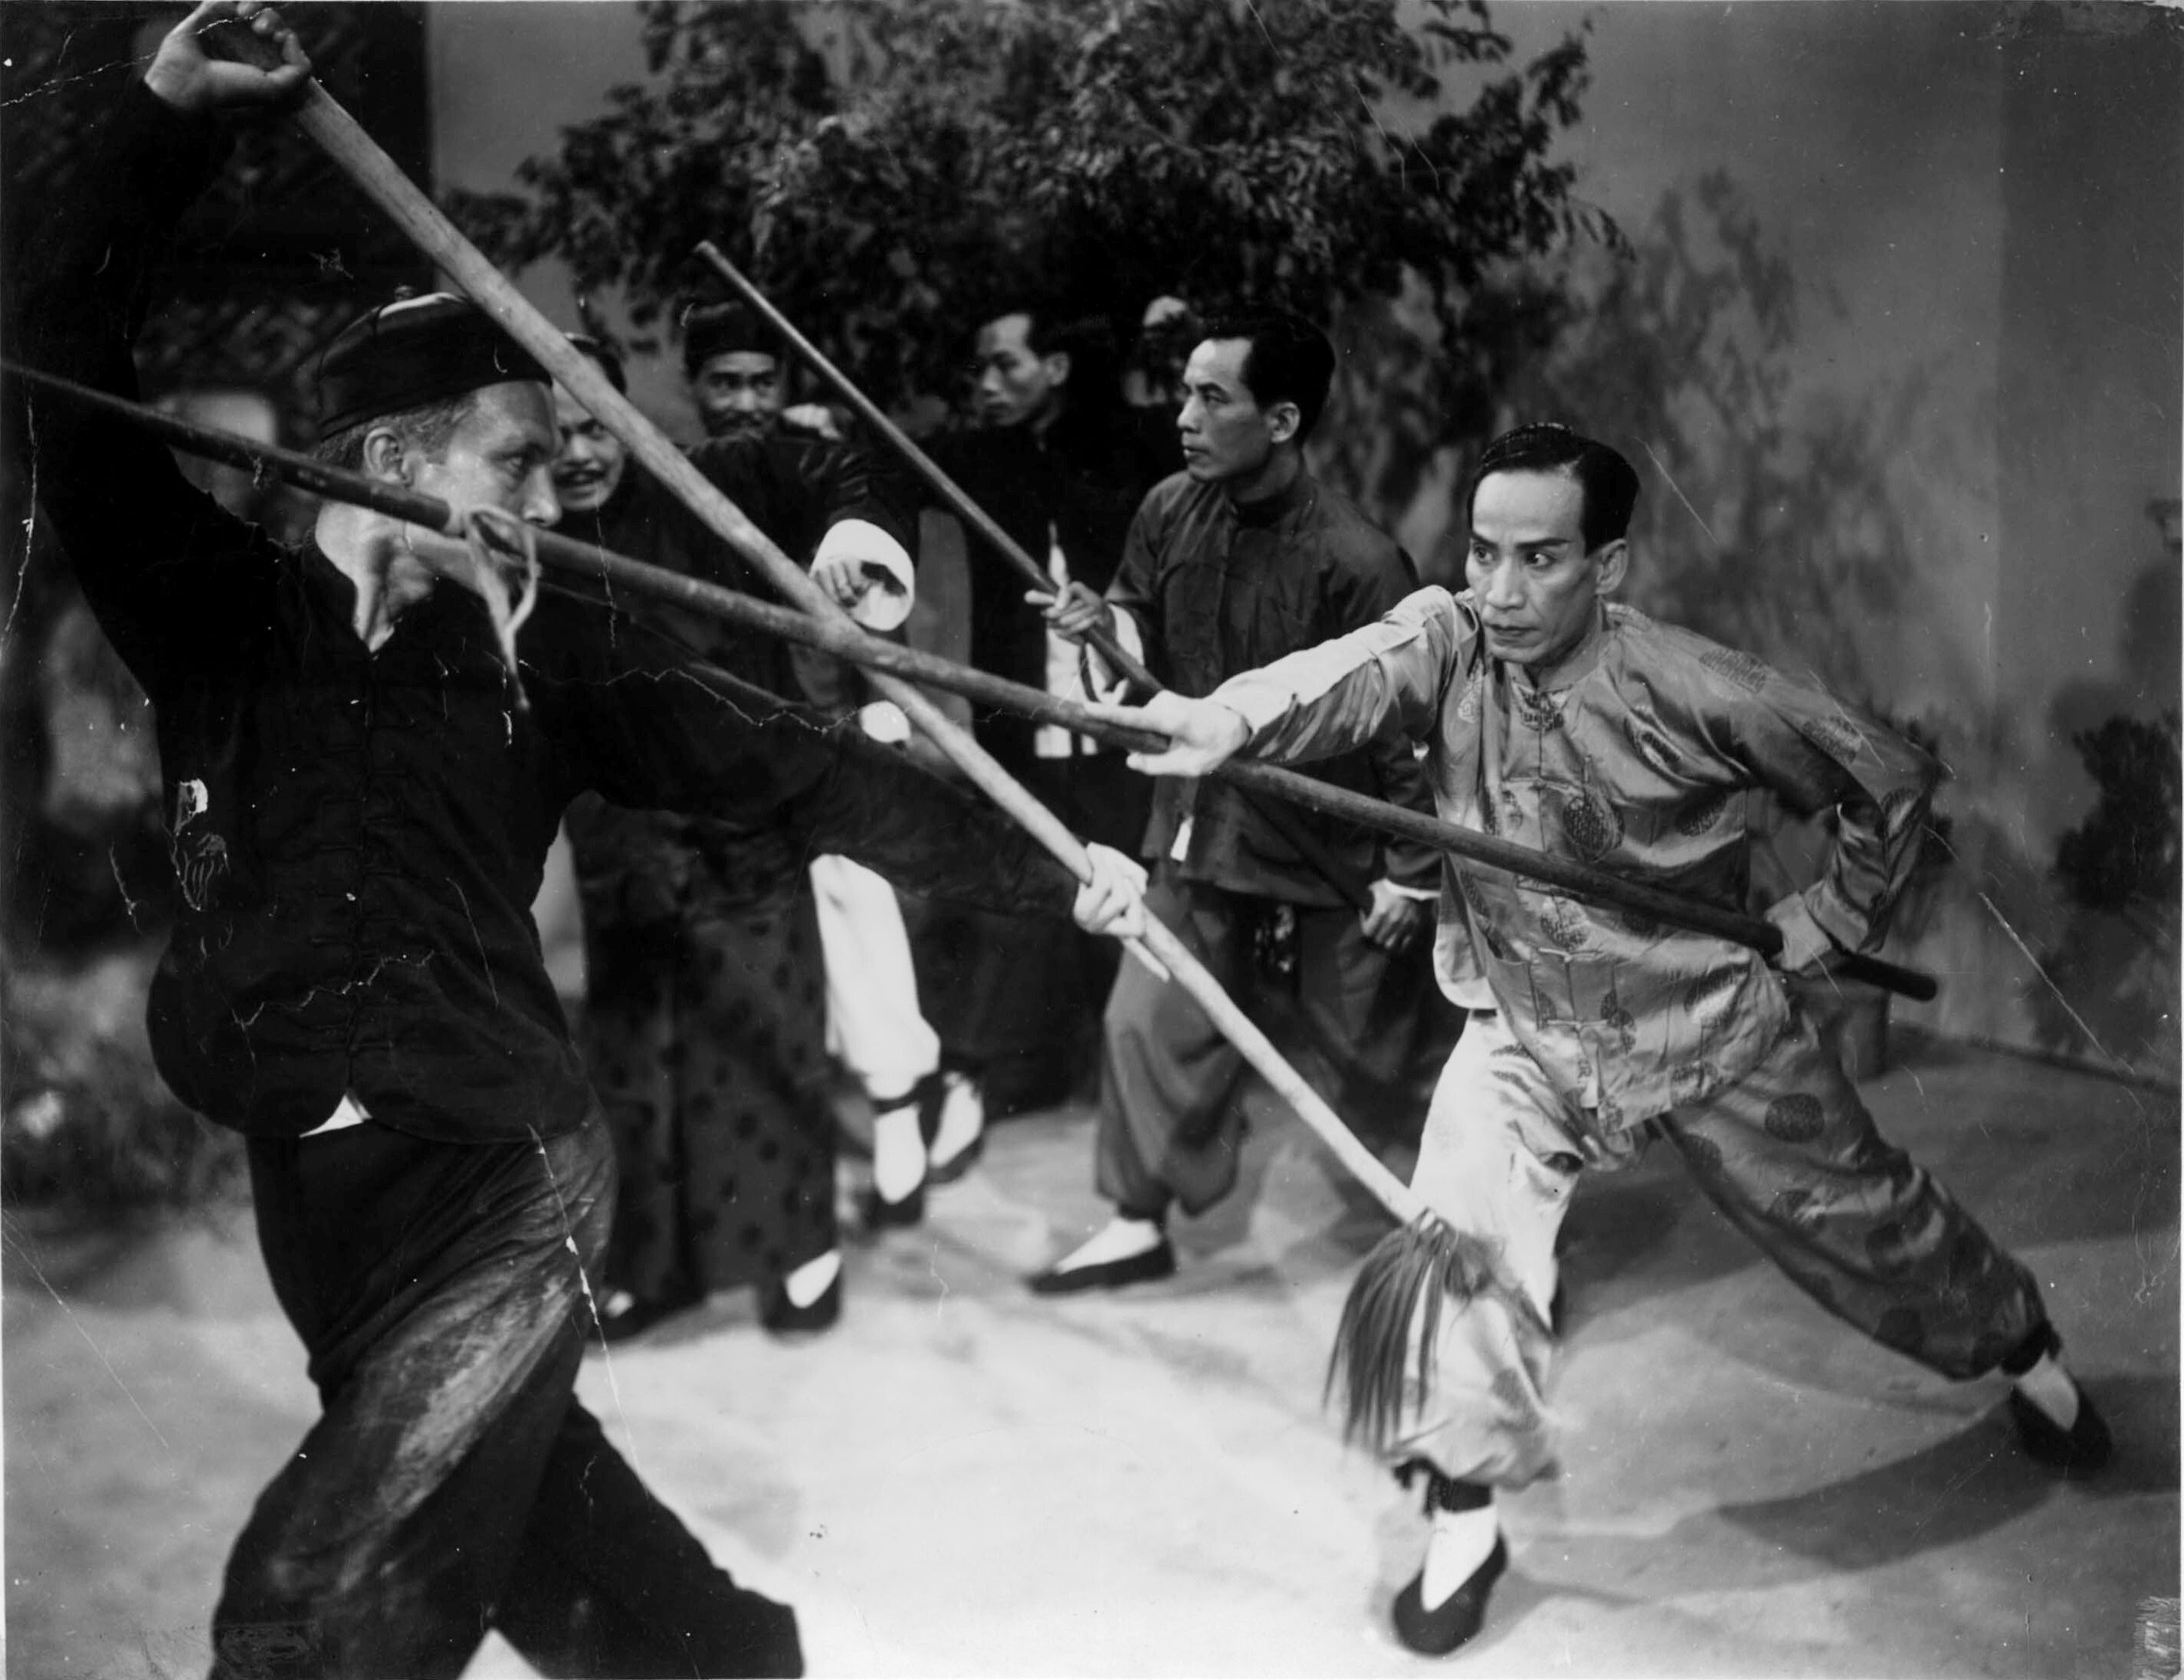 Kwan Tak-hing (right) in the title role in The Story of Wong Fei-hung, Part One: Wong Fei-hung’s Whip that Smacks the Candle (1949).